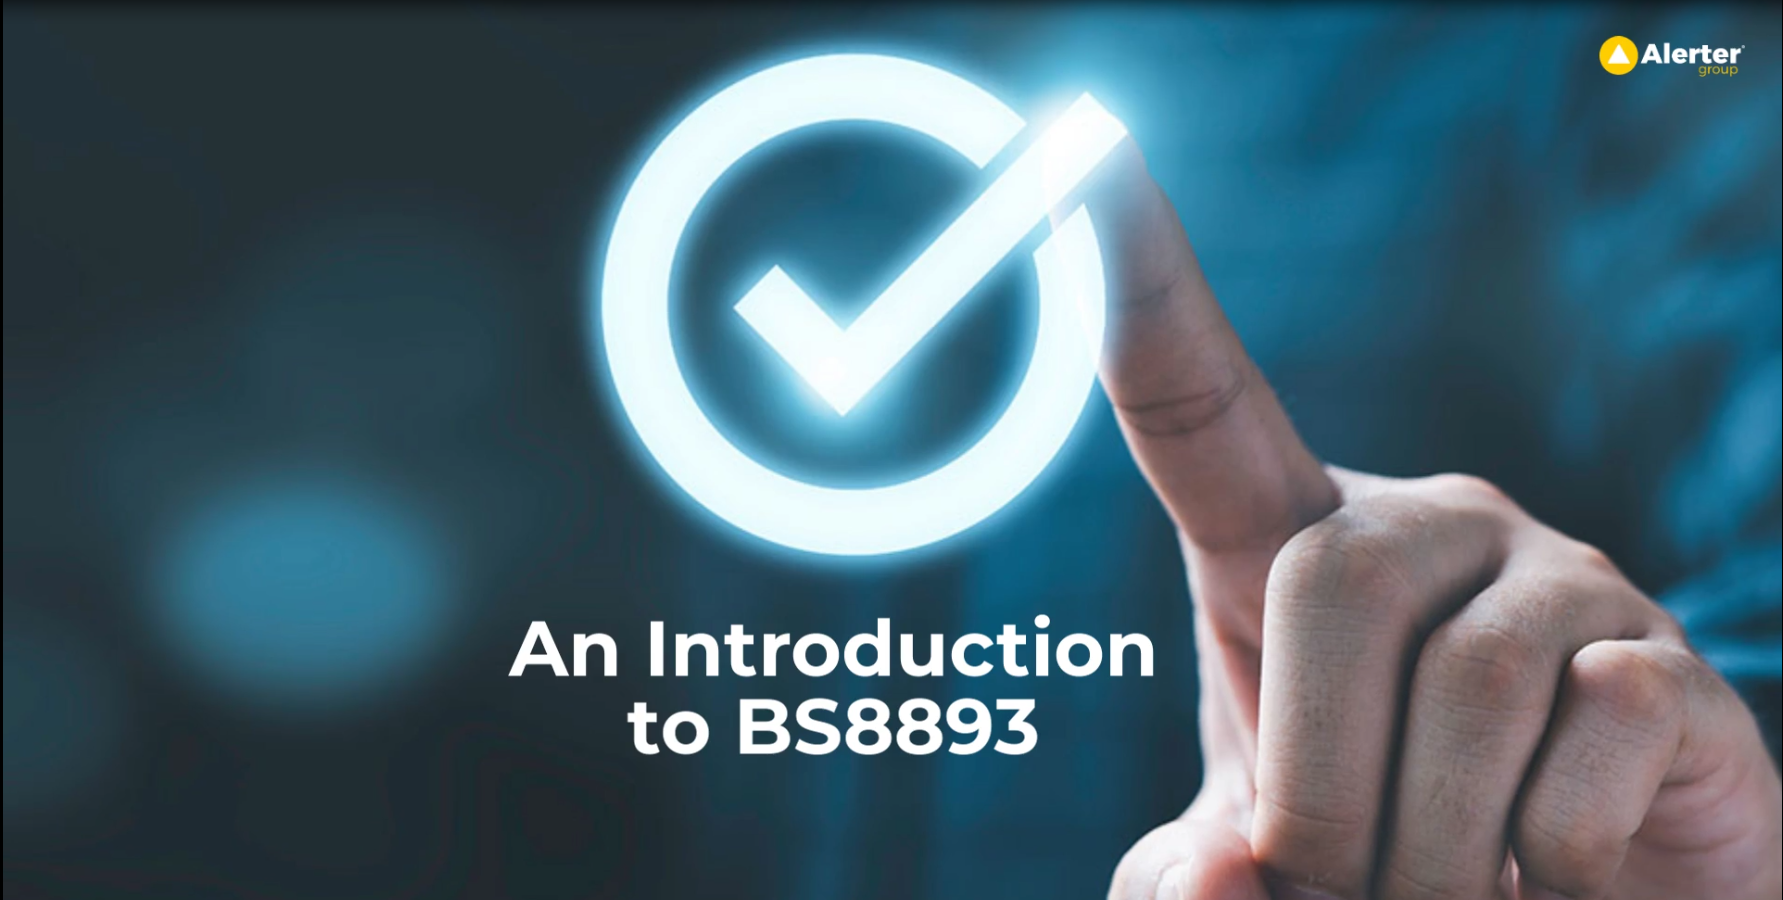 A hand touching a glowing check tick mark. Underneath are the words "An Introduction to BS8893"